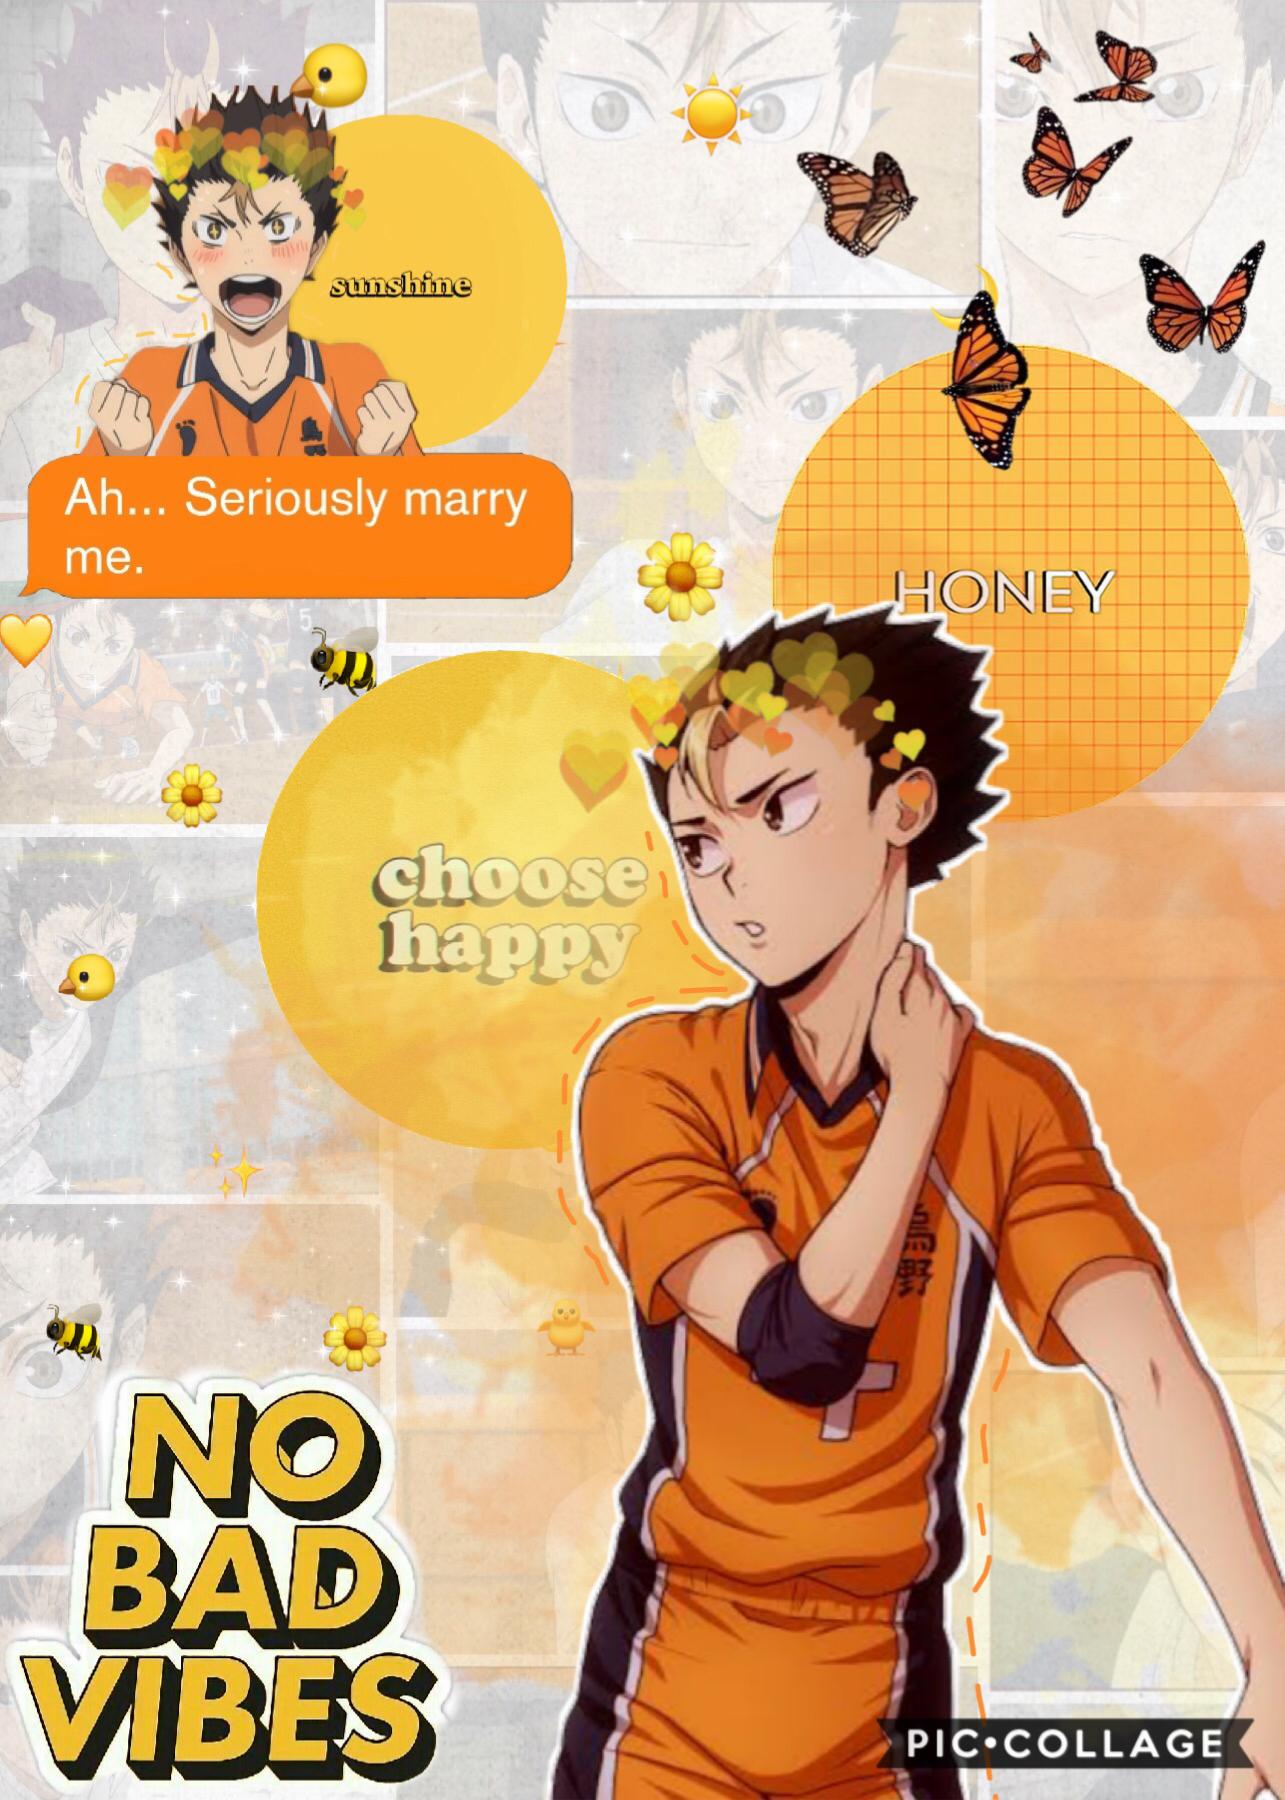 Err, this was requested by @r0lling_thunder. I usually don’t take requests, but it’s whatever I guess. As you can tell, I had no idea or inspiration at all, that’s also why it took me so long to post this. I’ll be making more Nishinoya edits in the future